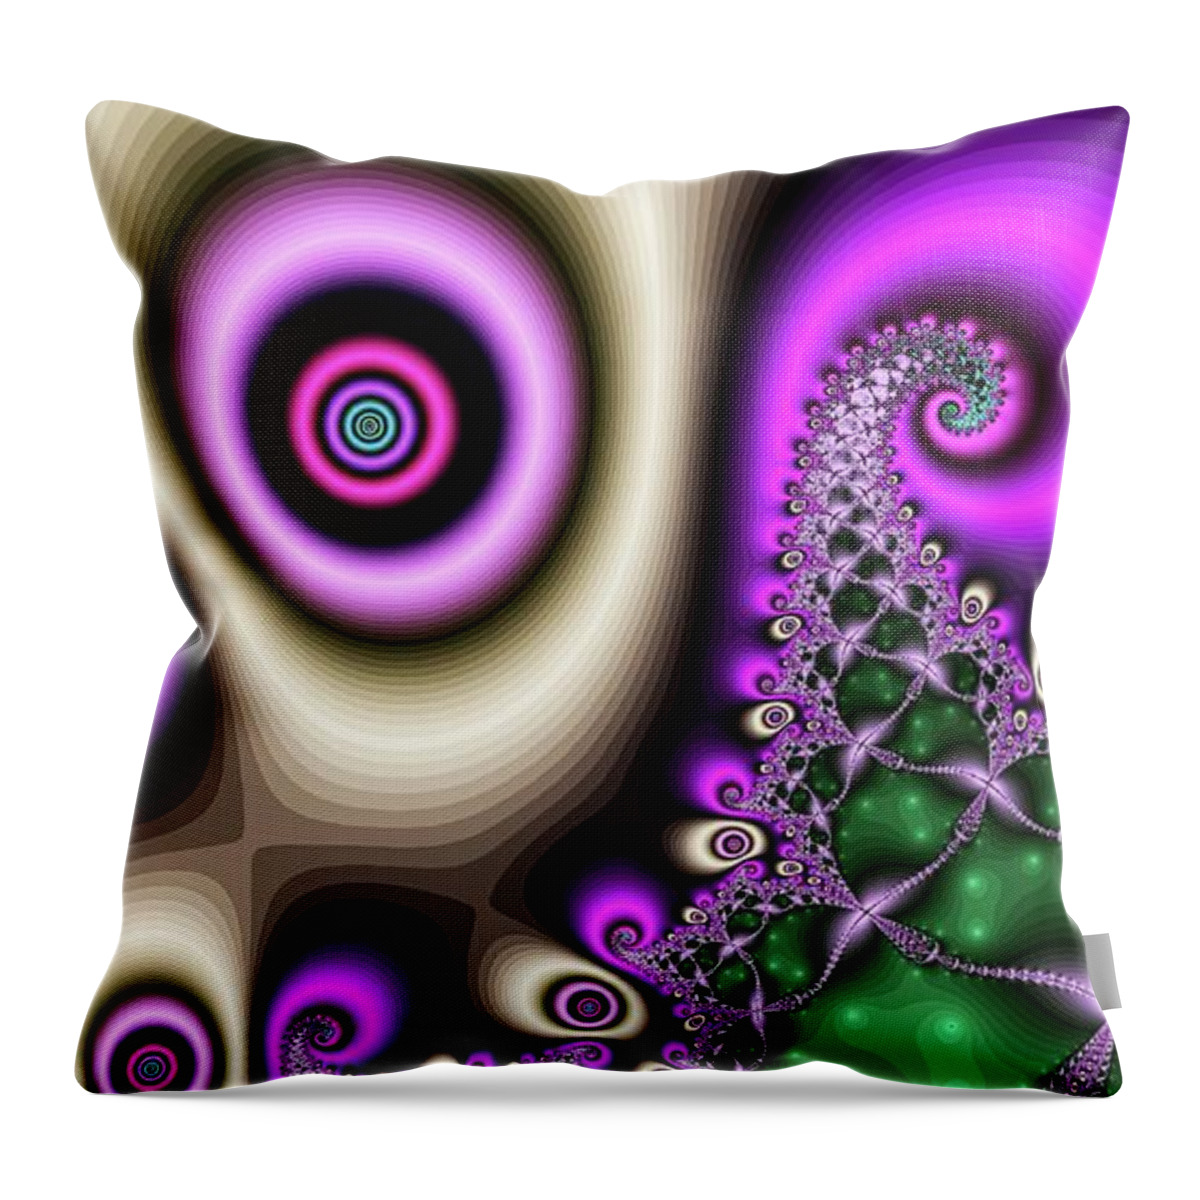 Fractal Throw Pillow featuring the digital art Pink Dancing Eye by Don Northup